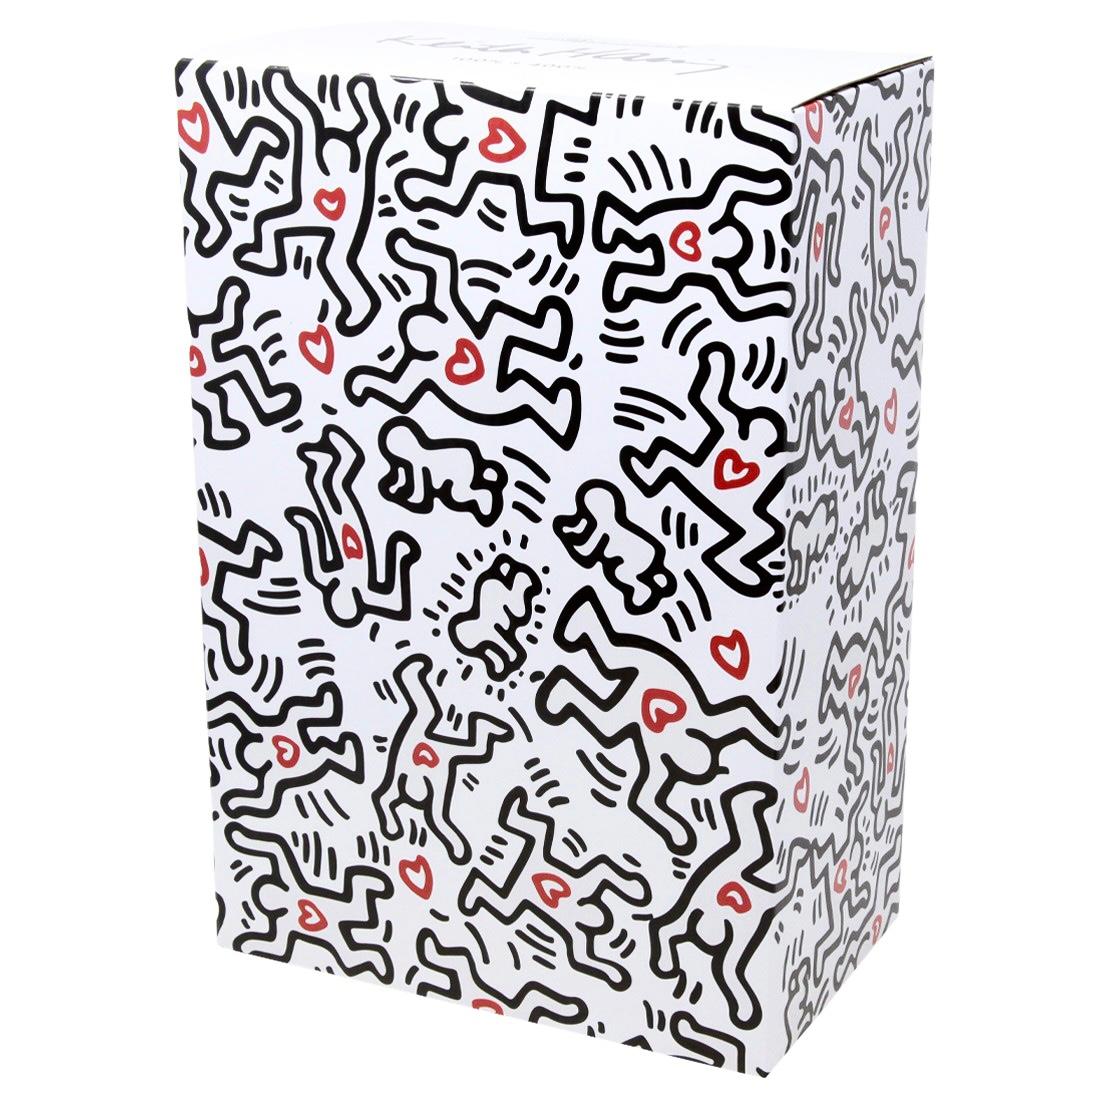 Keith Haring Bearbrick 400%  (Keith Haring BE@RBRICK)  - Street Art Sculpture by (after) Keith Haring